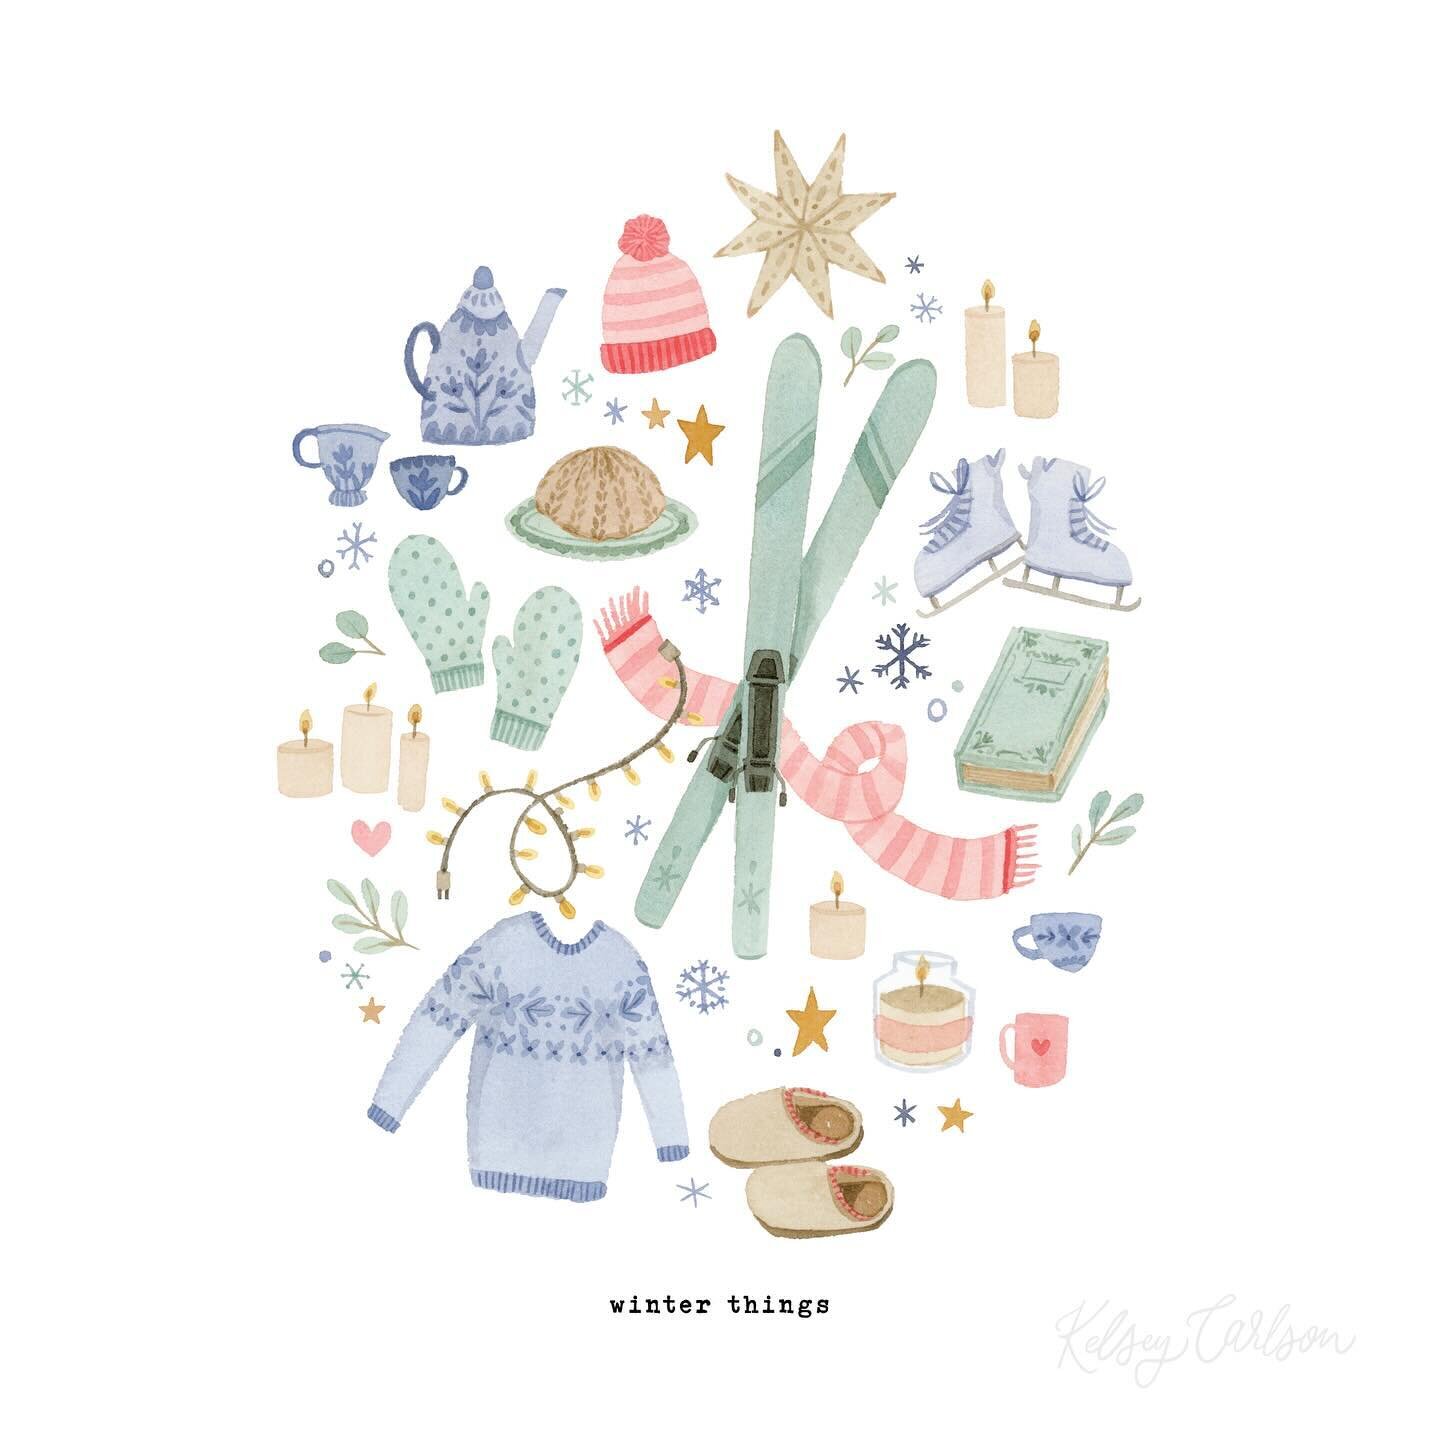 Happy Winter! I just finished this little painted collection of wintry hygge things.